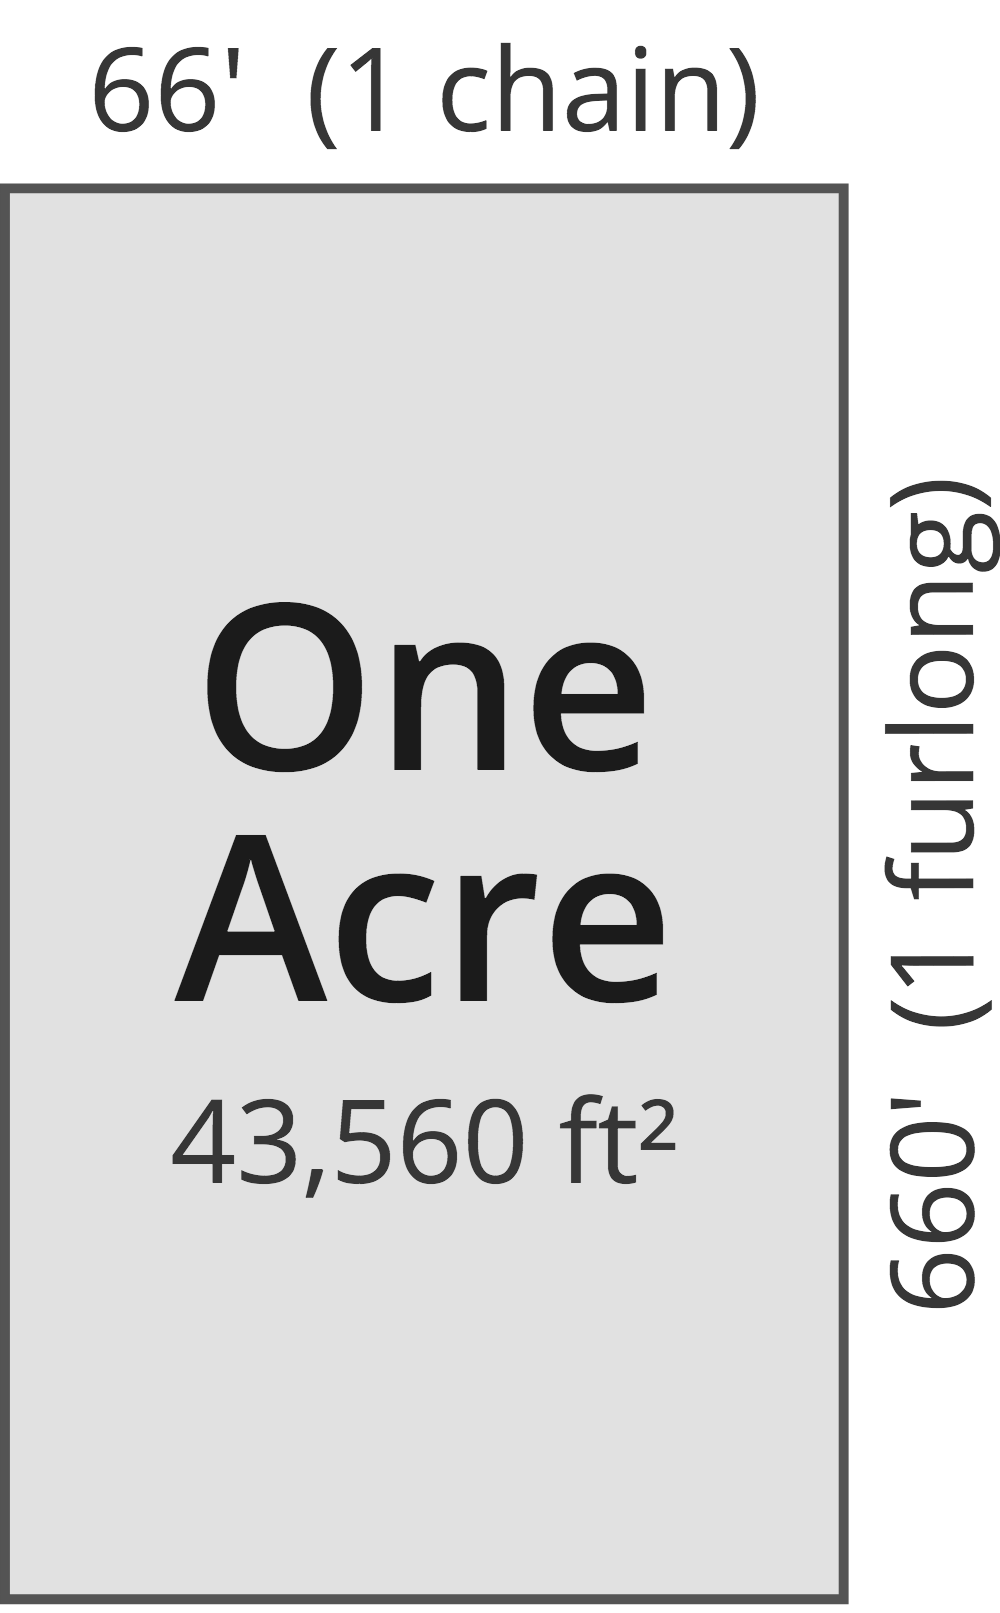 acreage-calculator-find-acres-using-a-map-or-land-dimensions